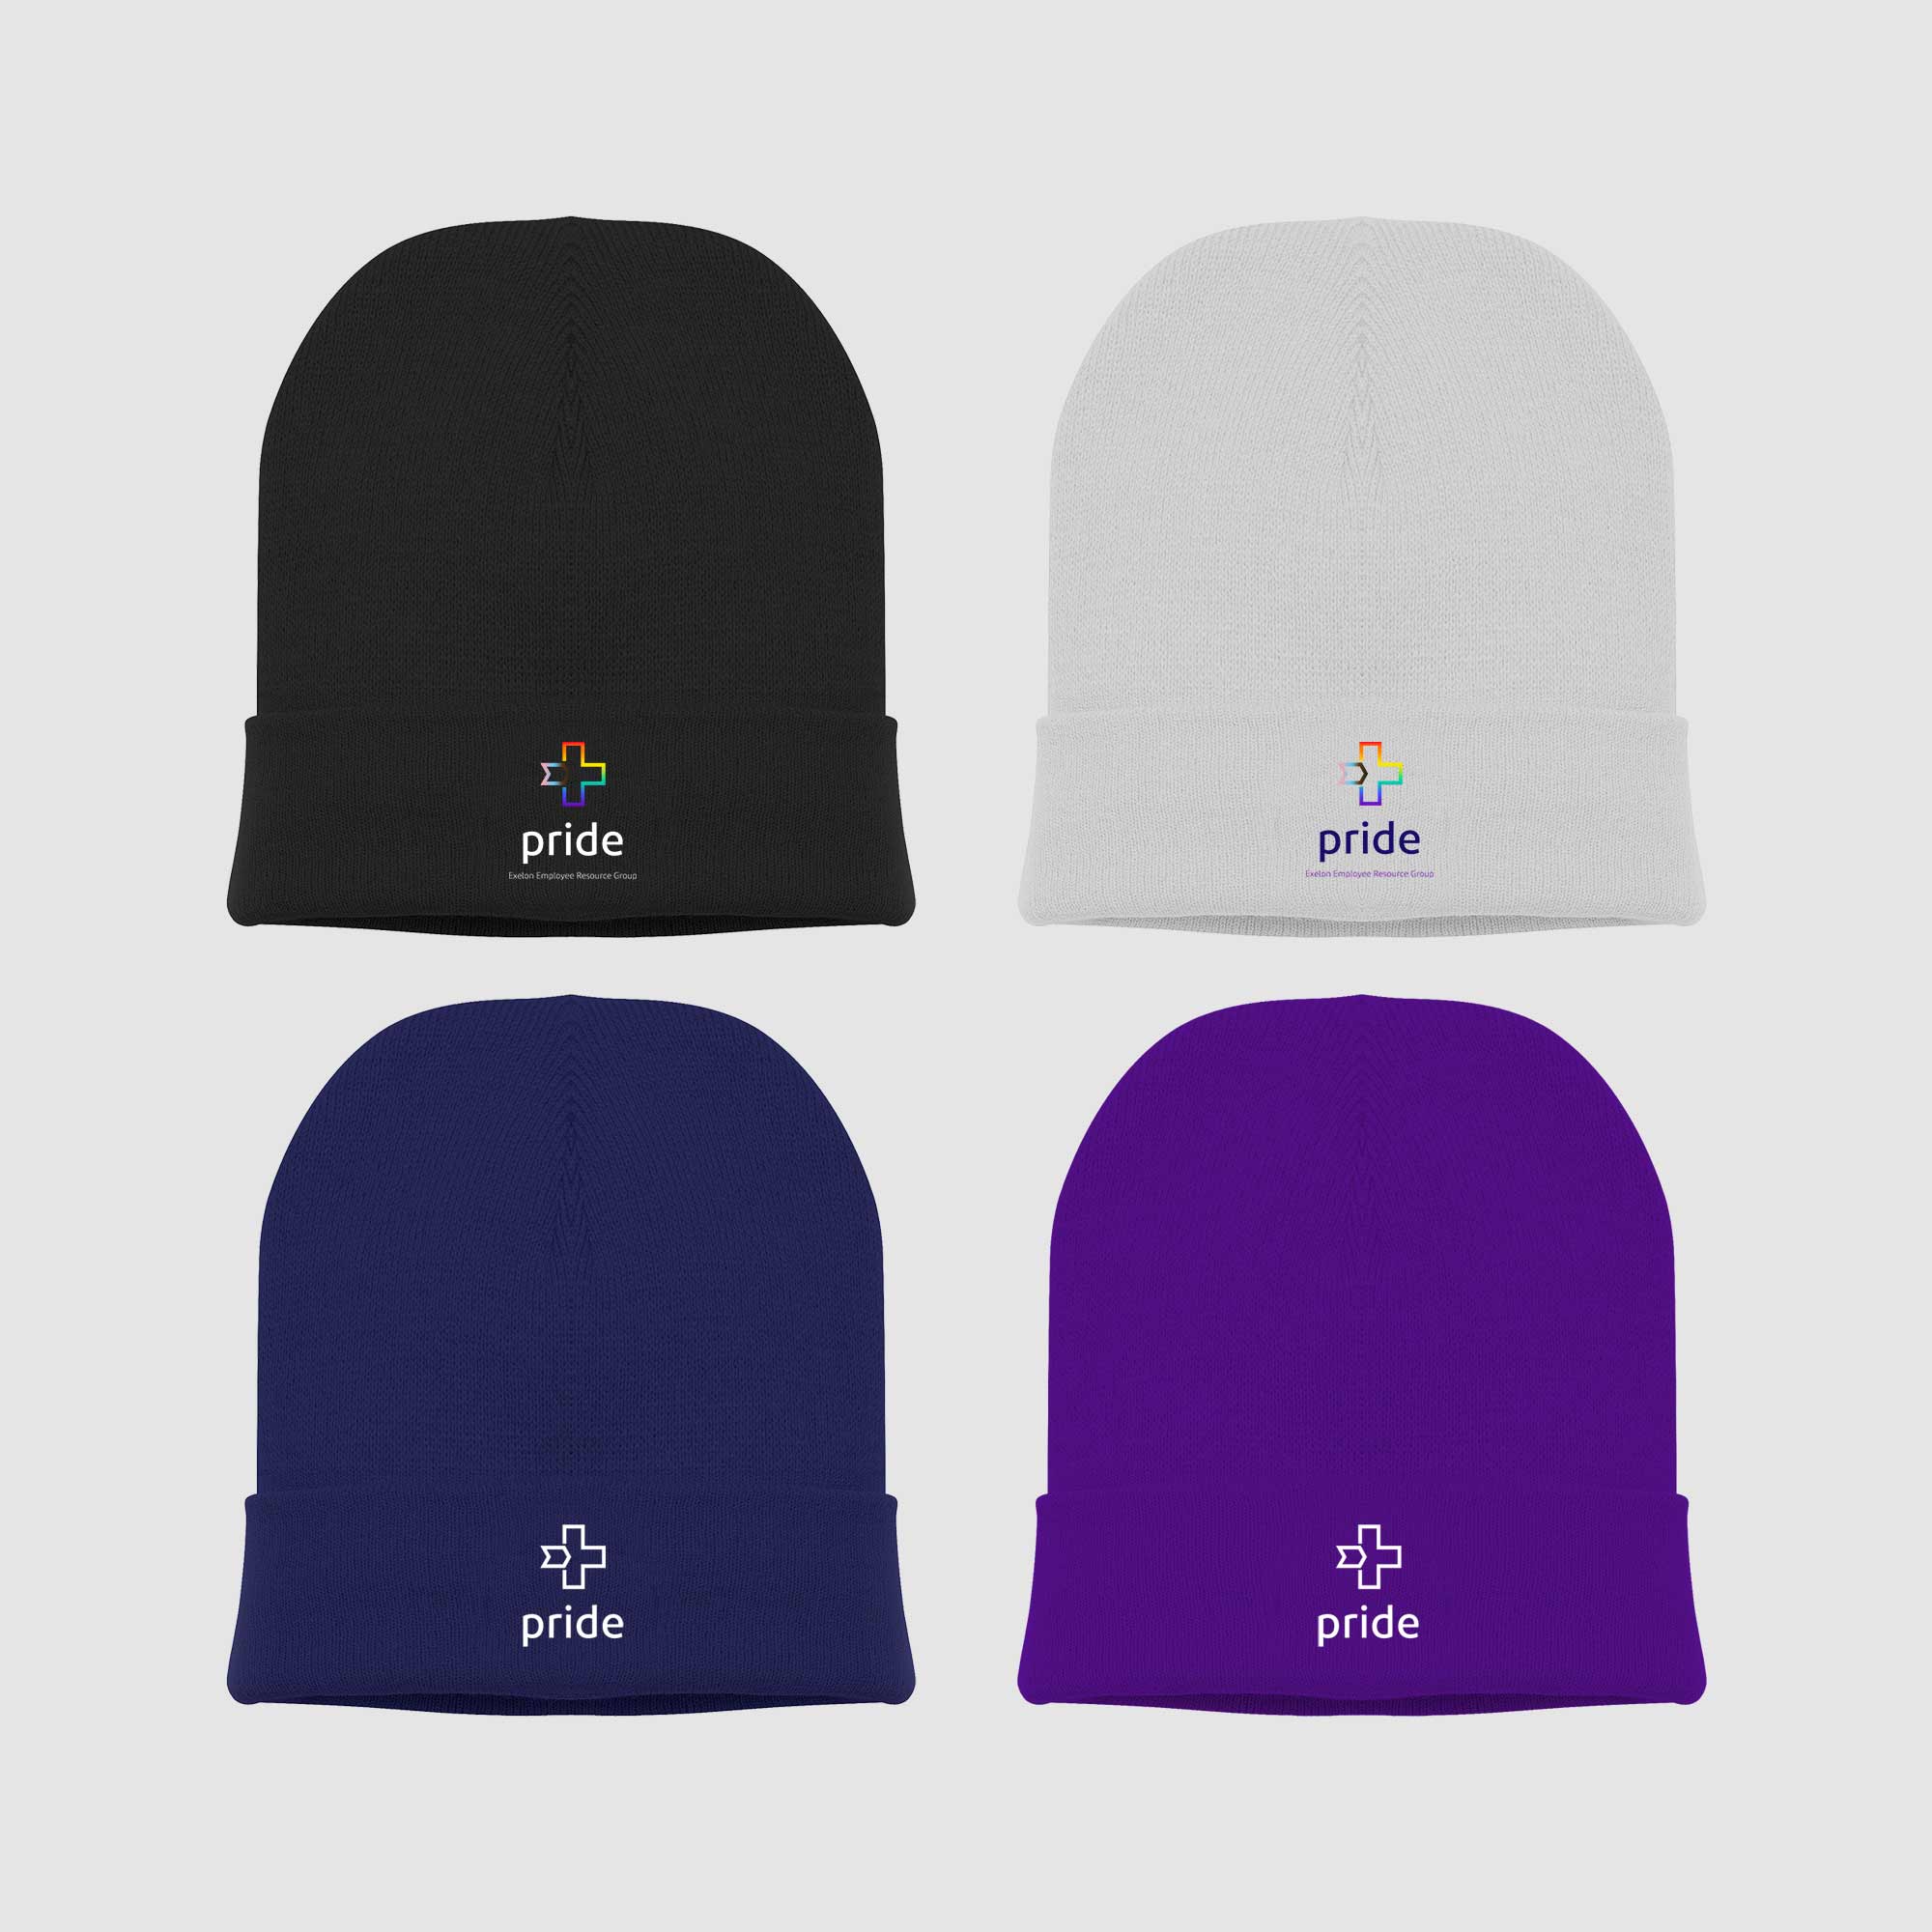 Four different colored knit hats with logos on them.